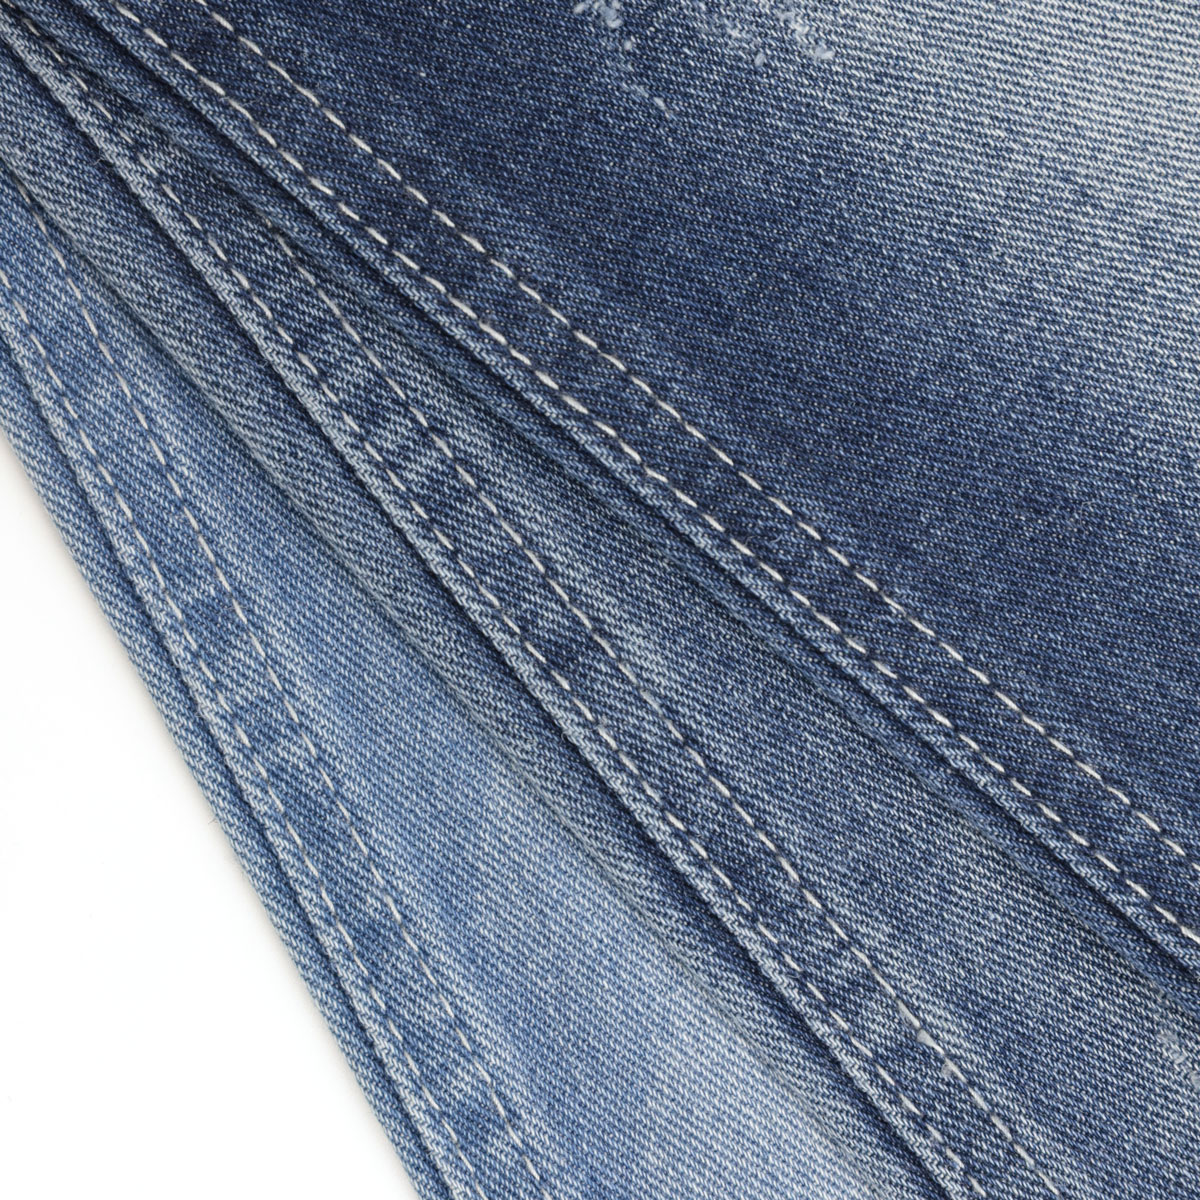 How to Care for Your New Stretch Denim Fabric 1